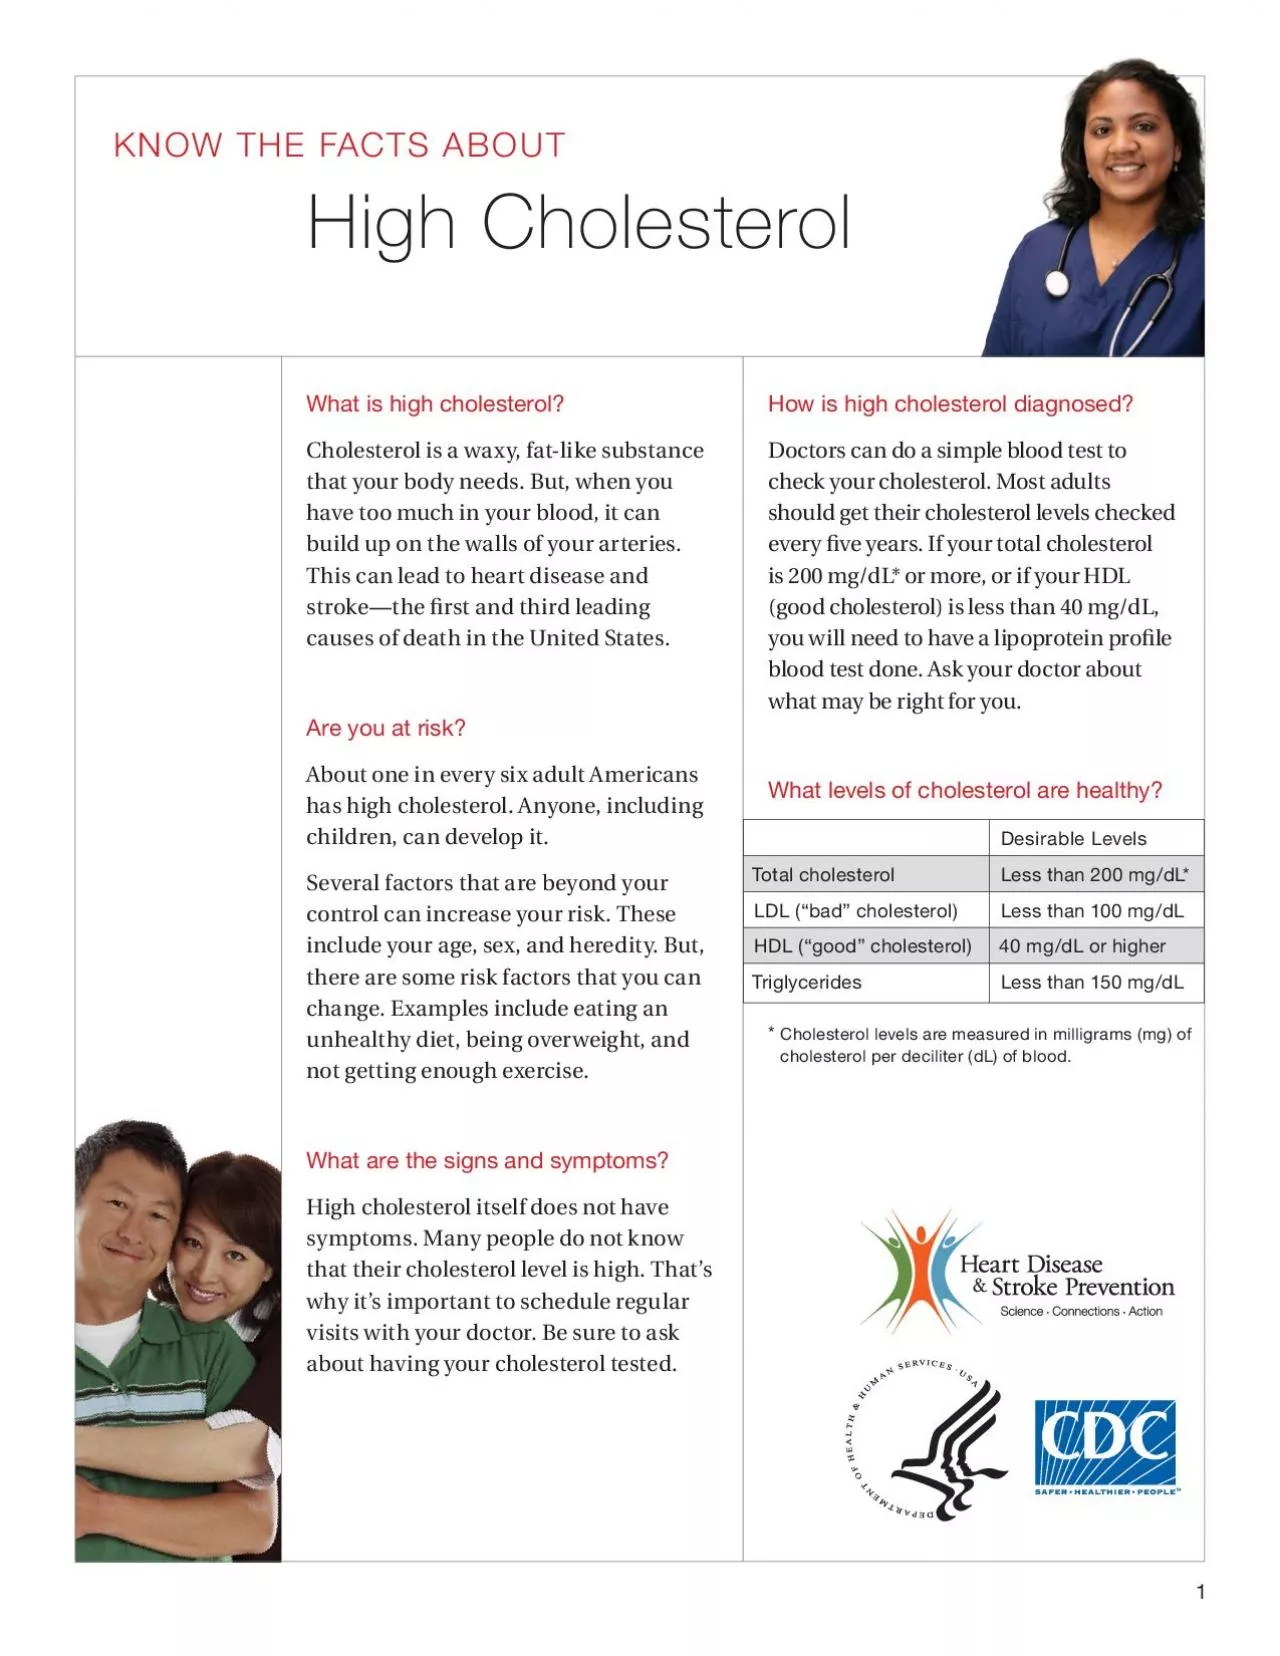 KNOW THE FACTS ABOUTHigh Cholesterol